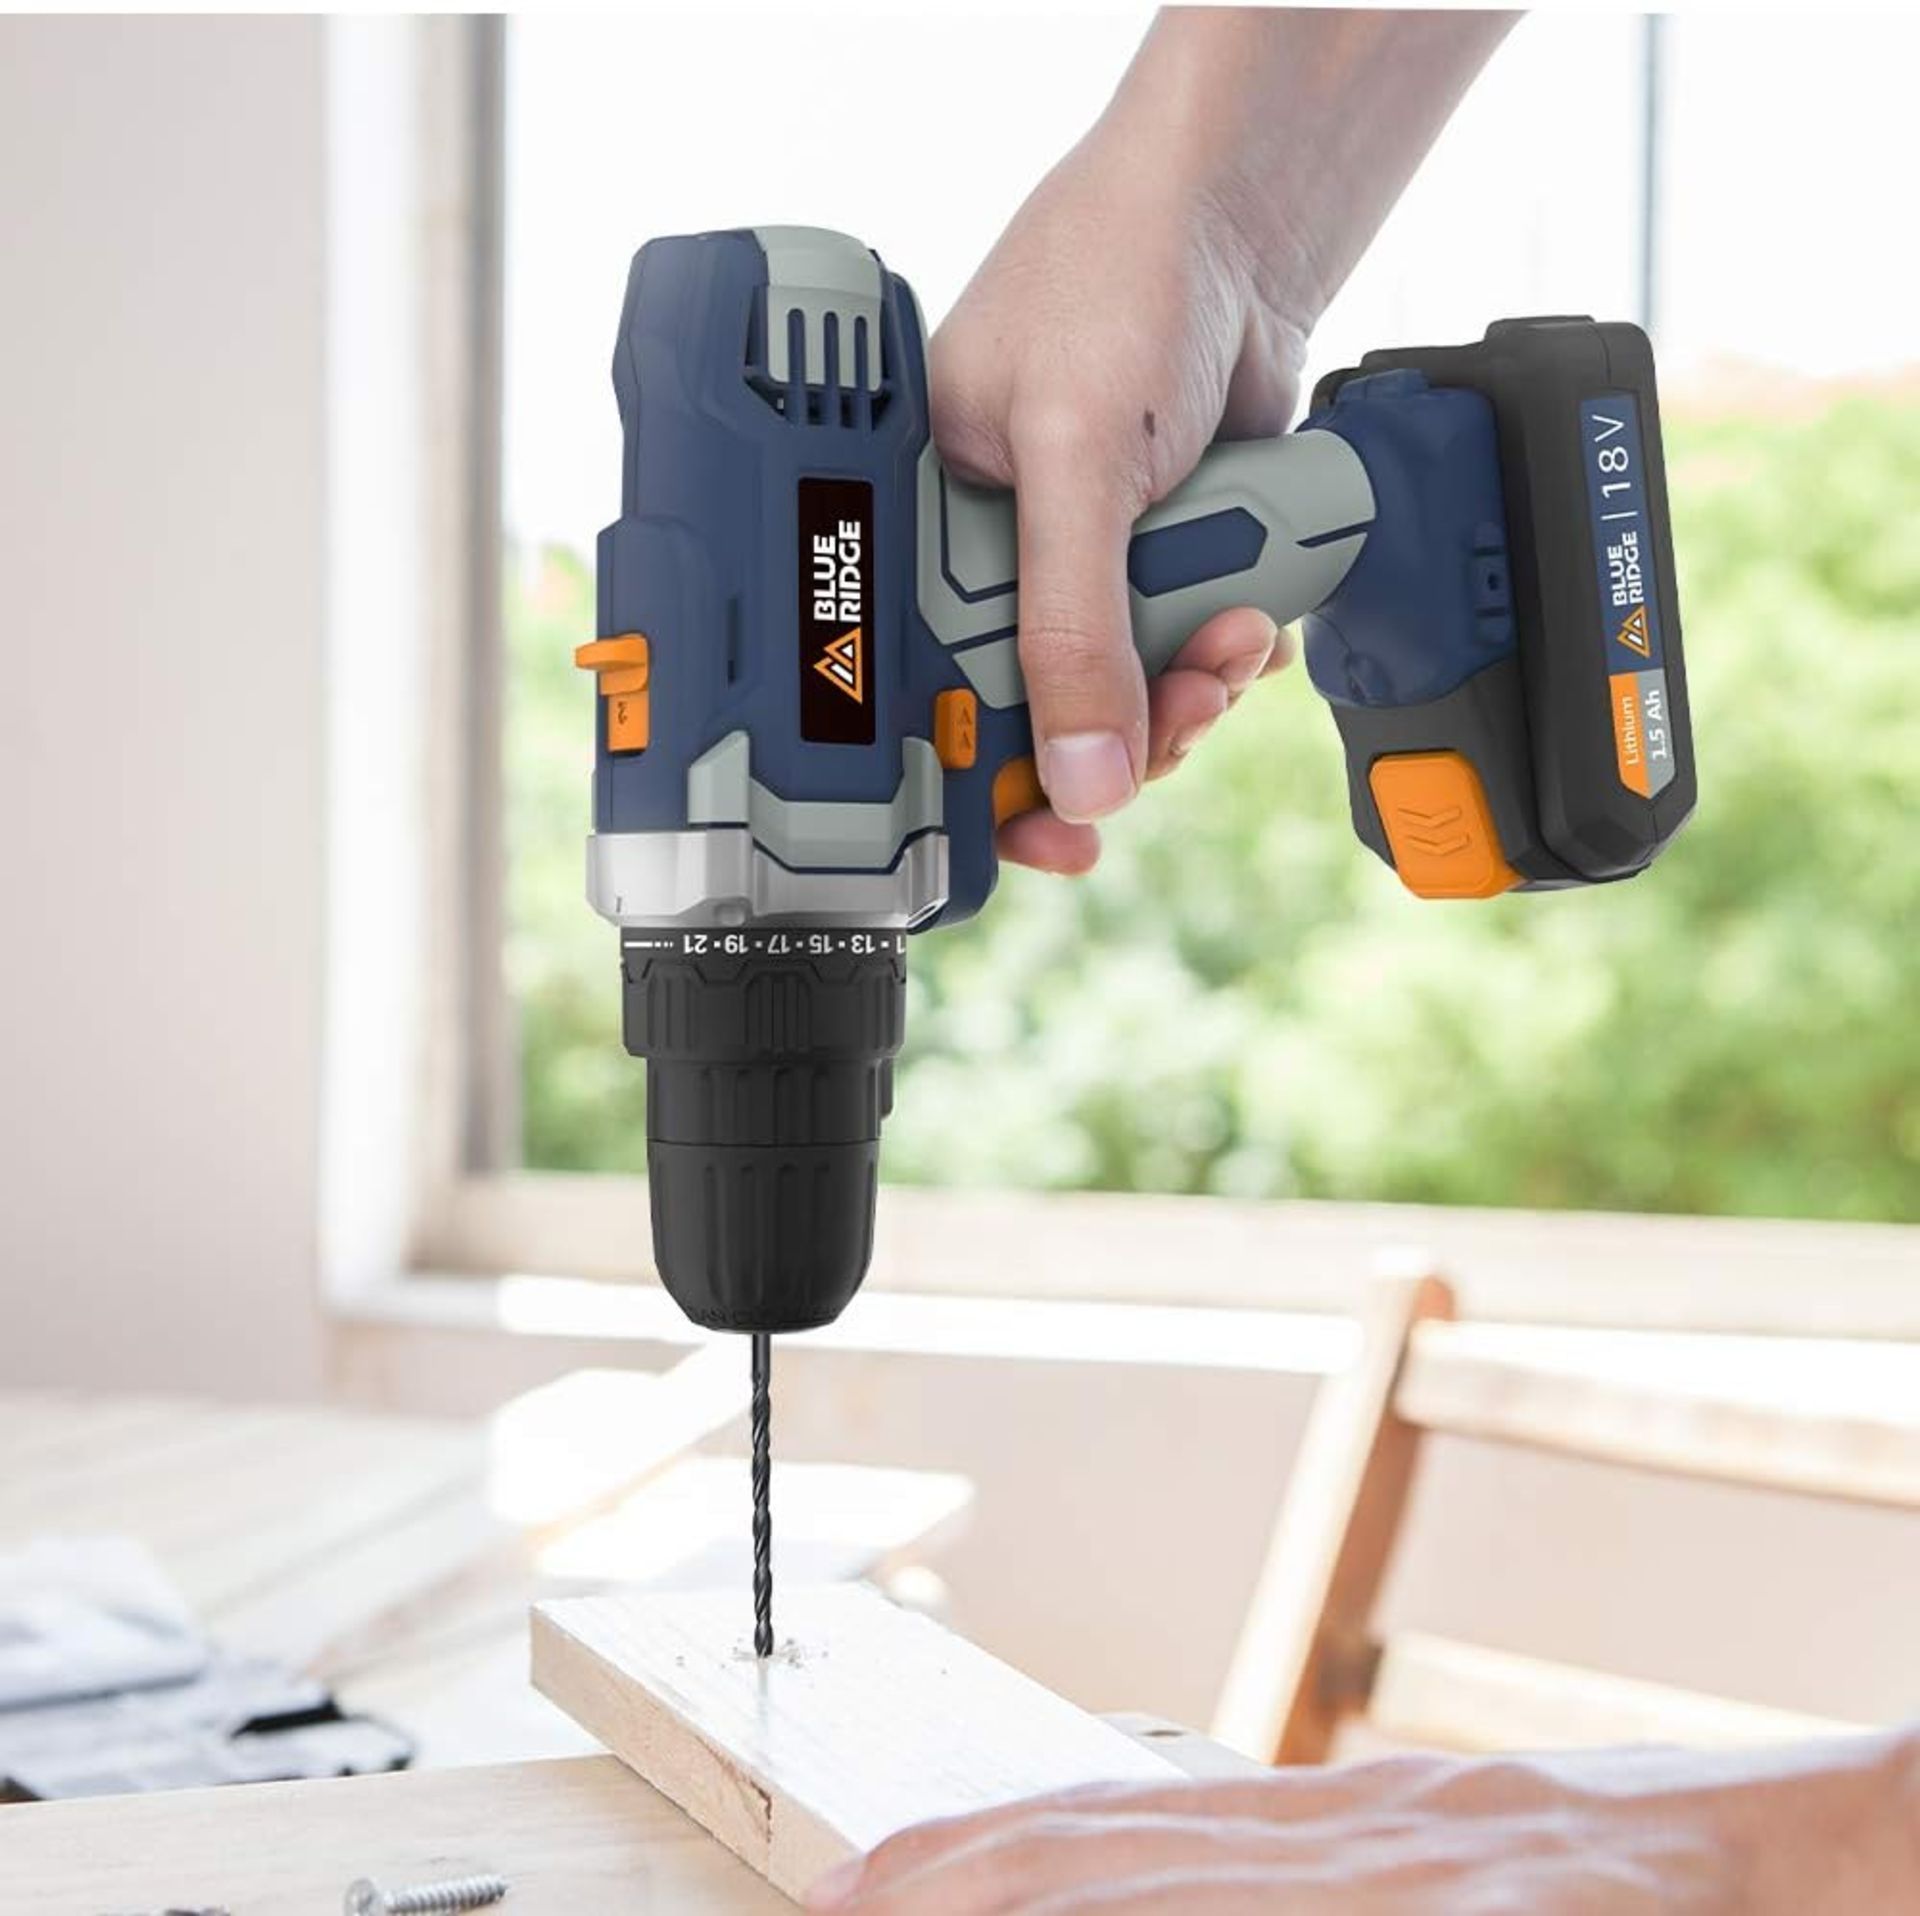 TRADE OT TO CONTAIN 20x NEW & BOXED BLUE RIDGE 18V Cordless Drill Driver. RRP £89 EACH. The - Image 6 of 9